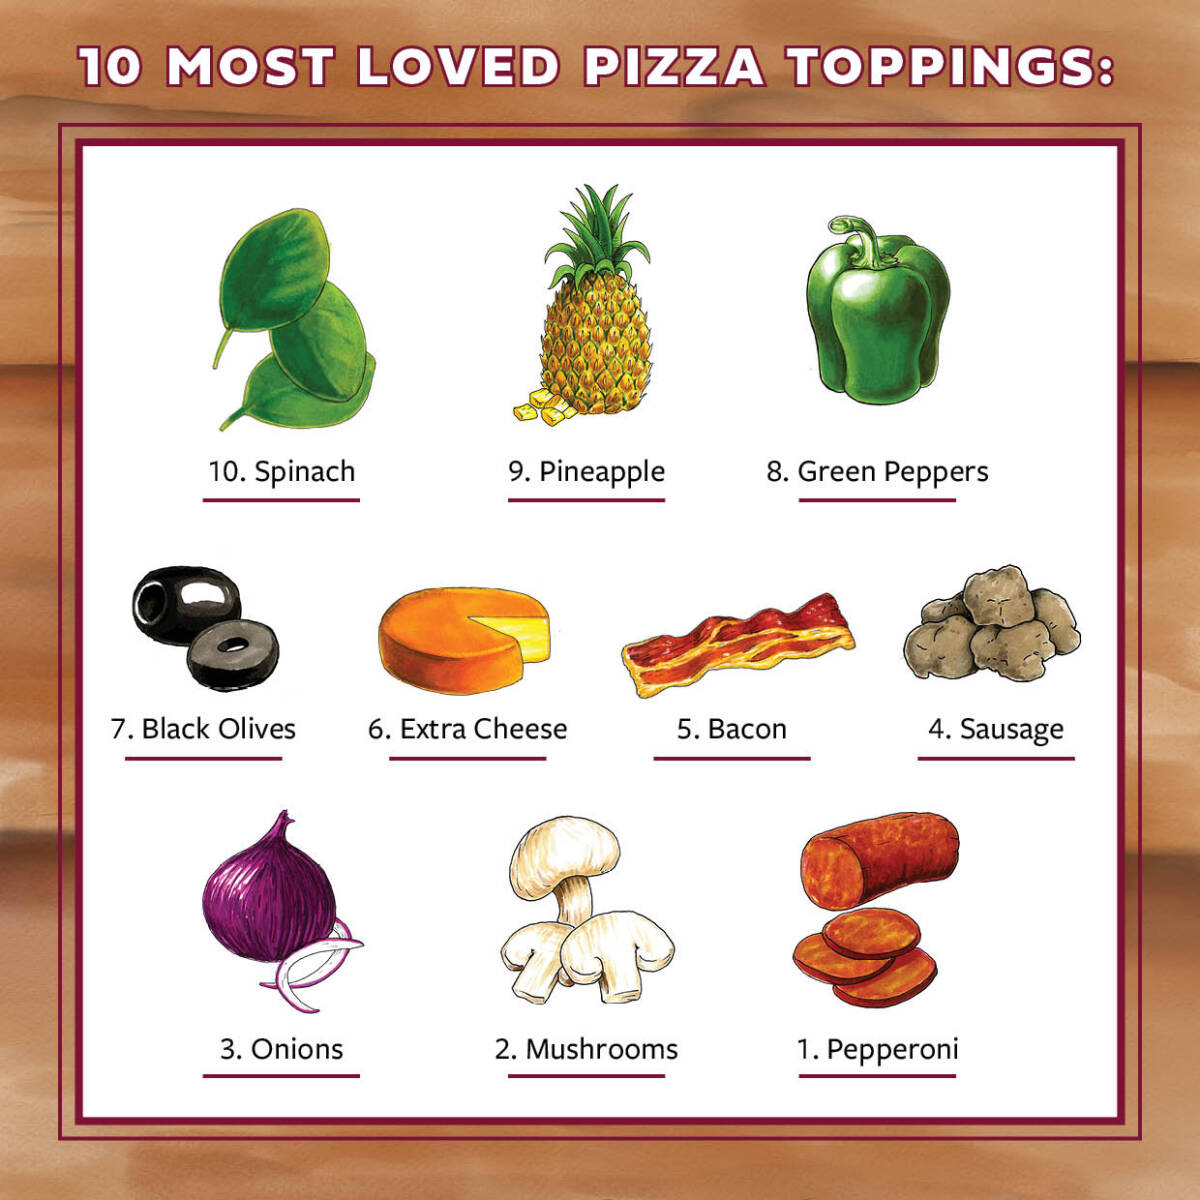 Types of pizza toppings in an infographic.